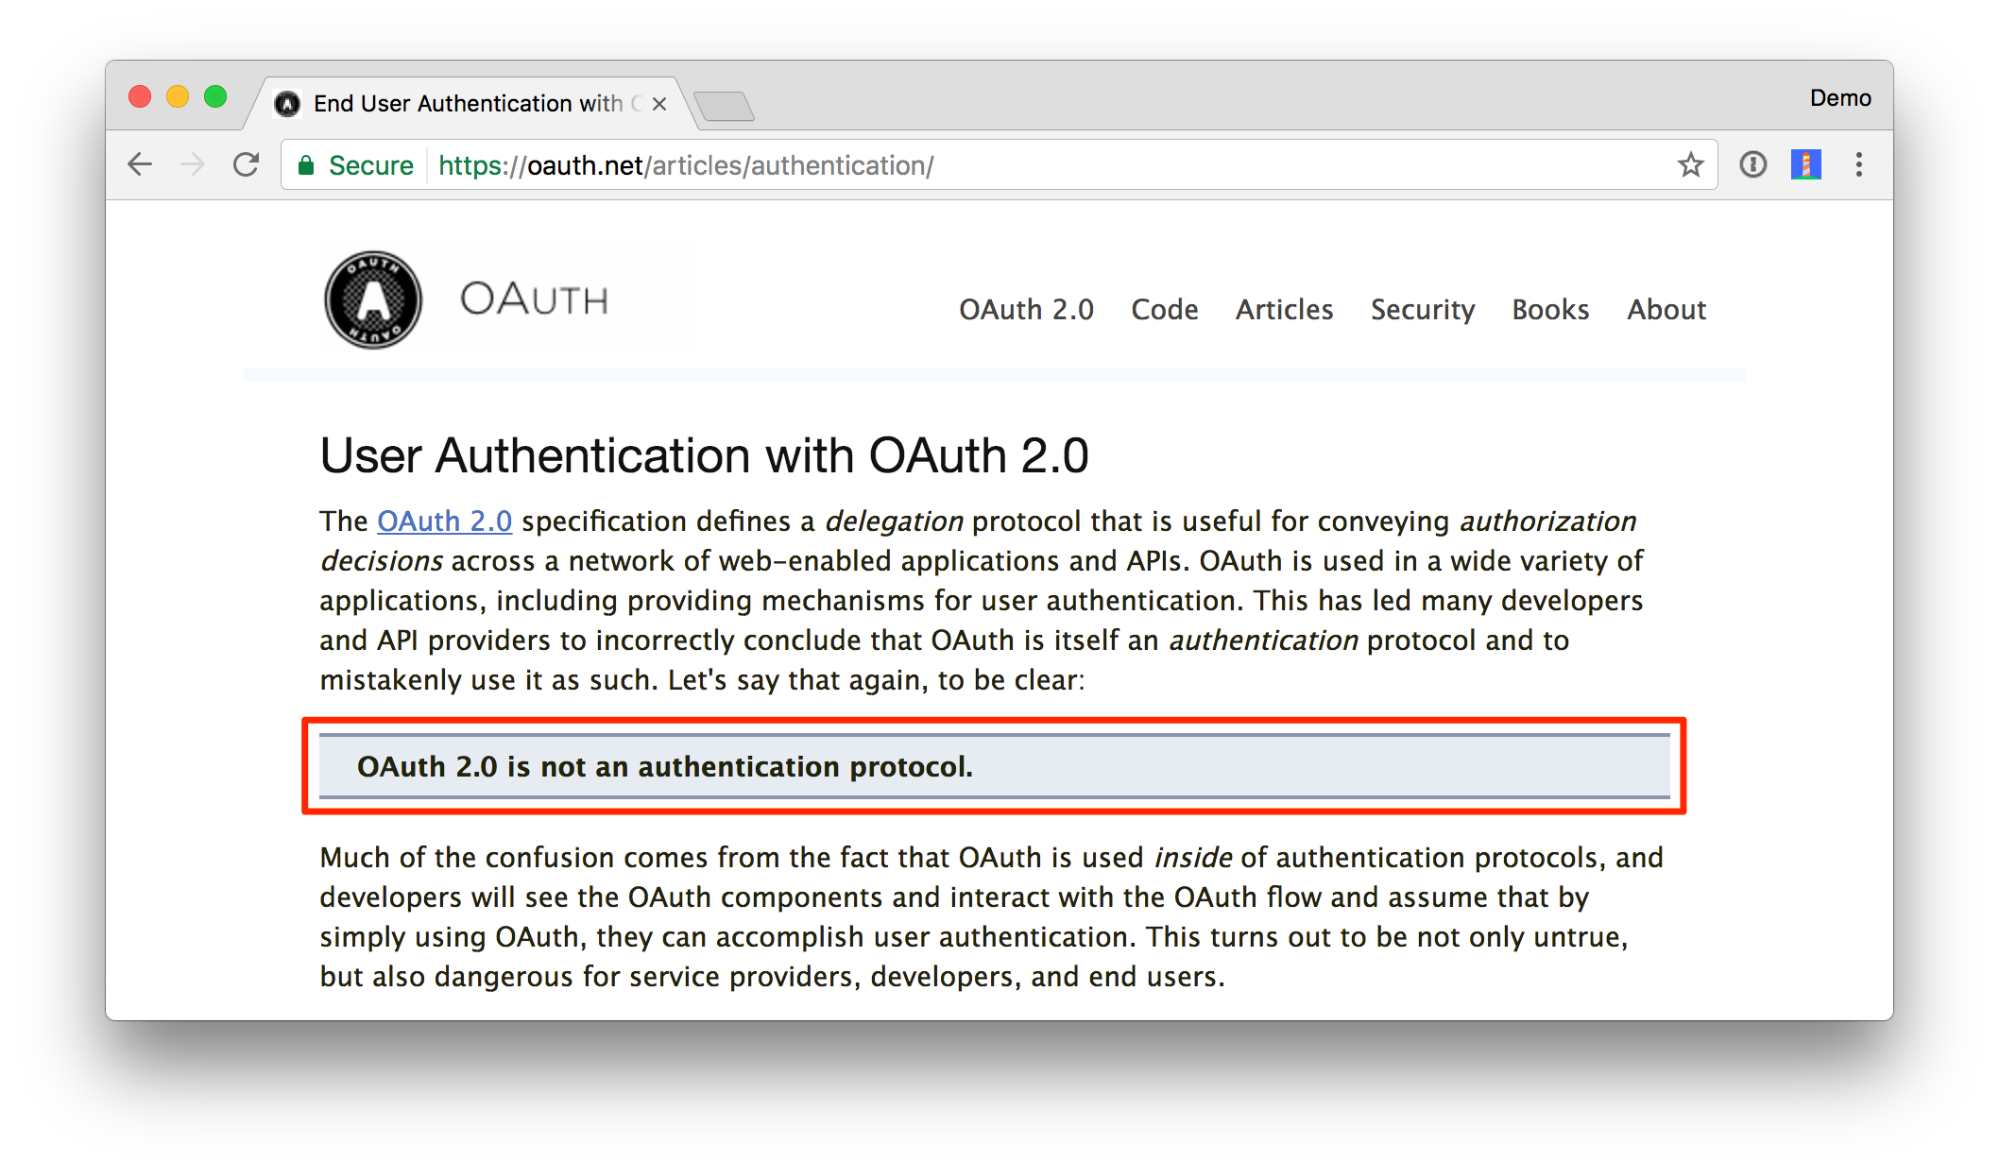 OAuth is not an authentication protocol (oauth.net)